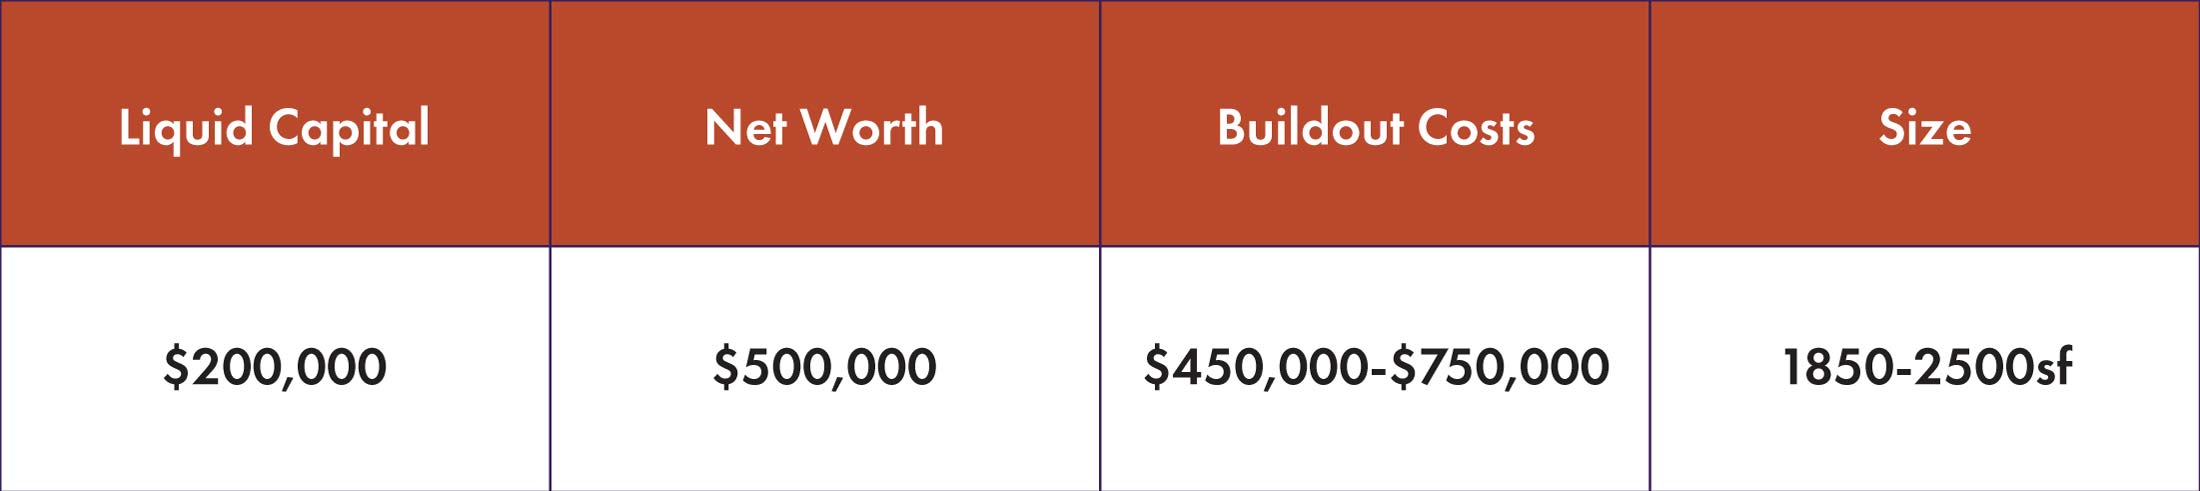 Liquid Capital $200,000 Net Worth $500,000 Buildout Costs $450,000-$750,000 Size 1850-2500sf